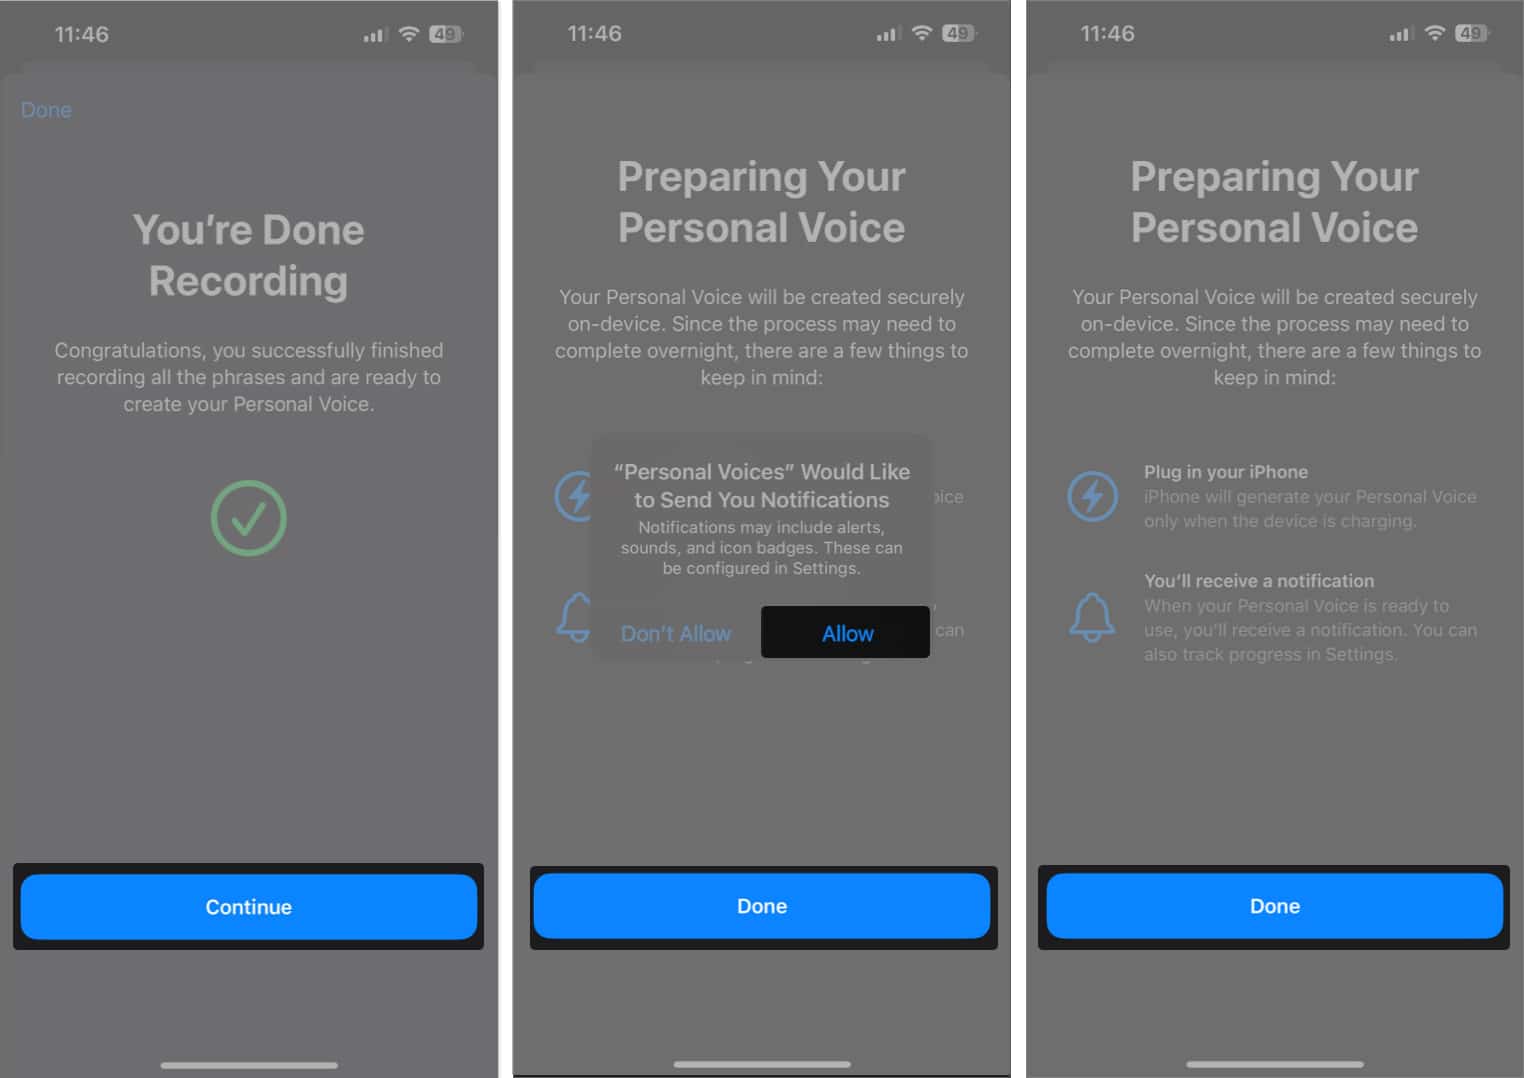 Finish Setting up your Personal Voice on iPhone in iOS 17